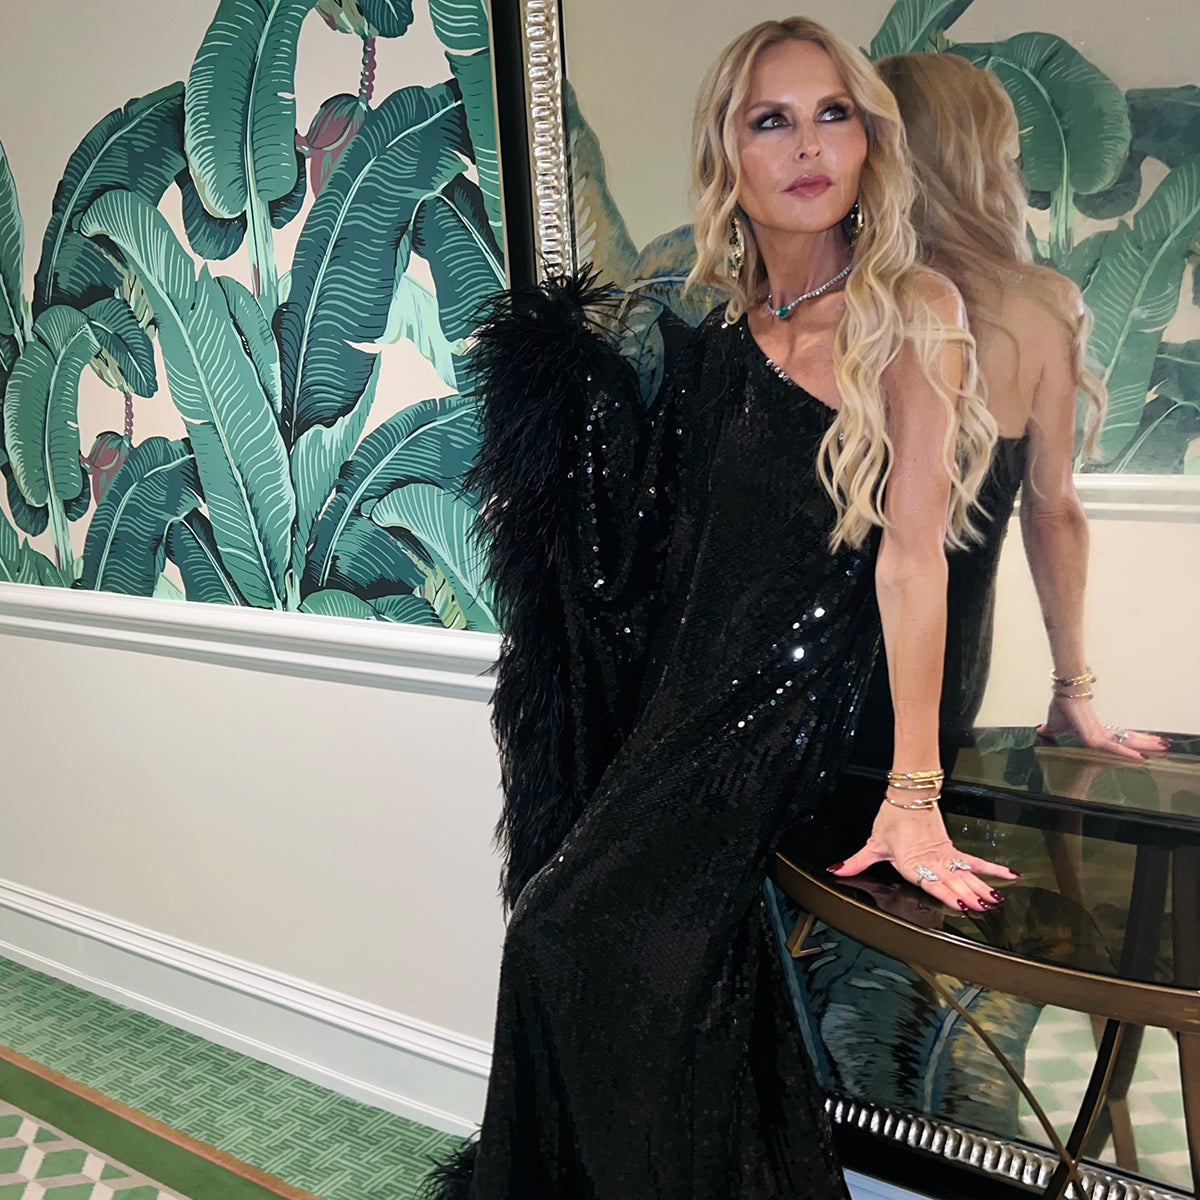 Rachel Zoe - So let's try this again Happy New Year? Do over anyone ? # 2022 here yet? 🤦‍♀️